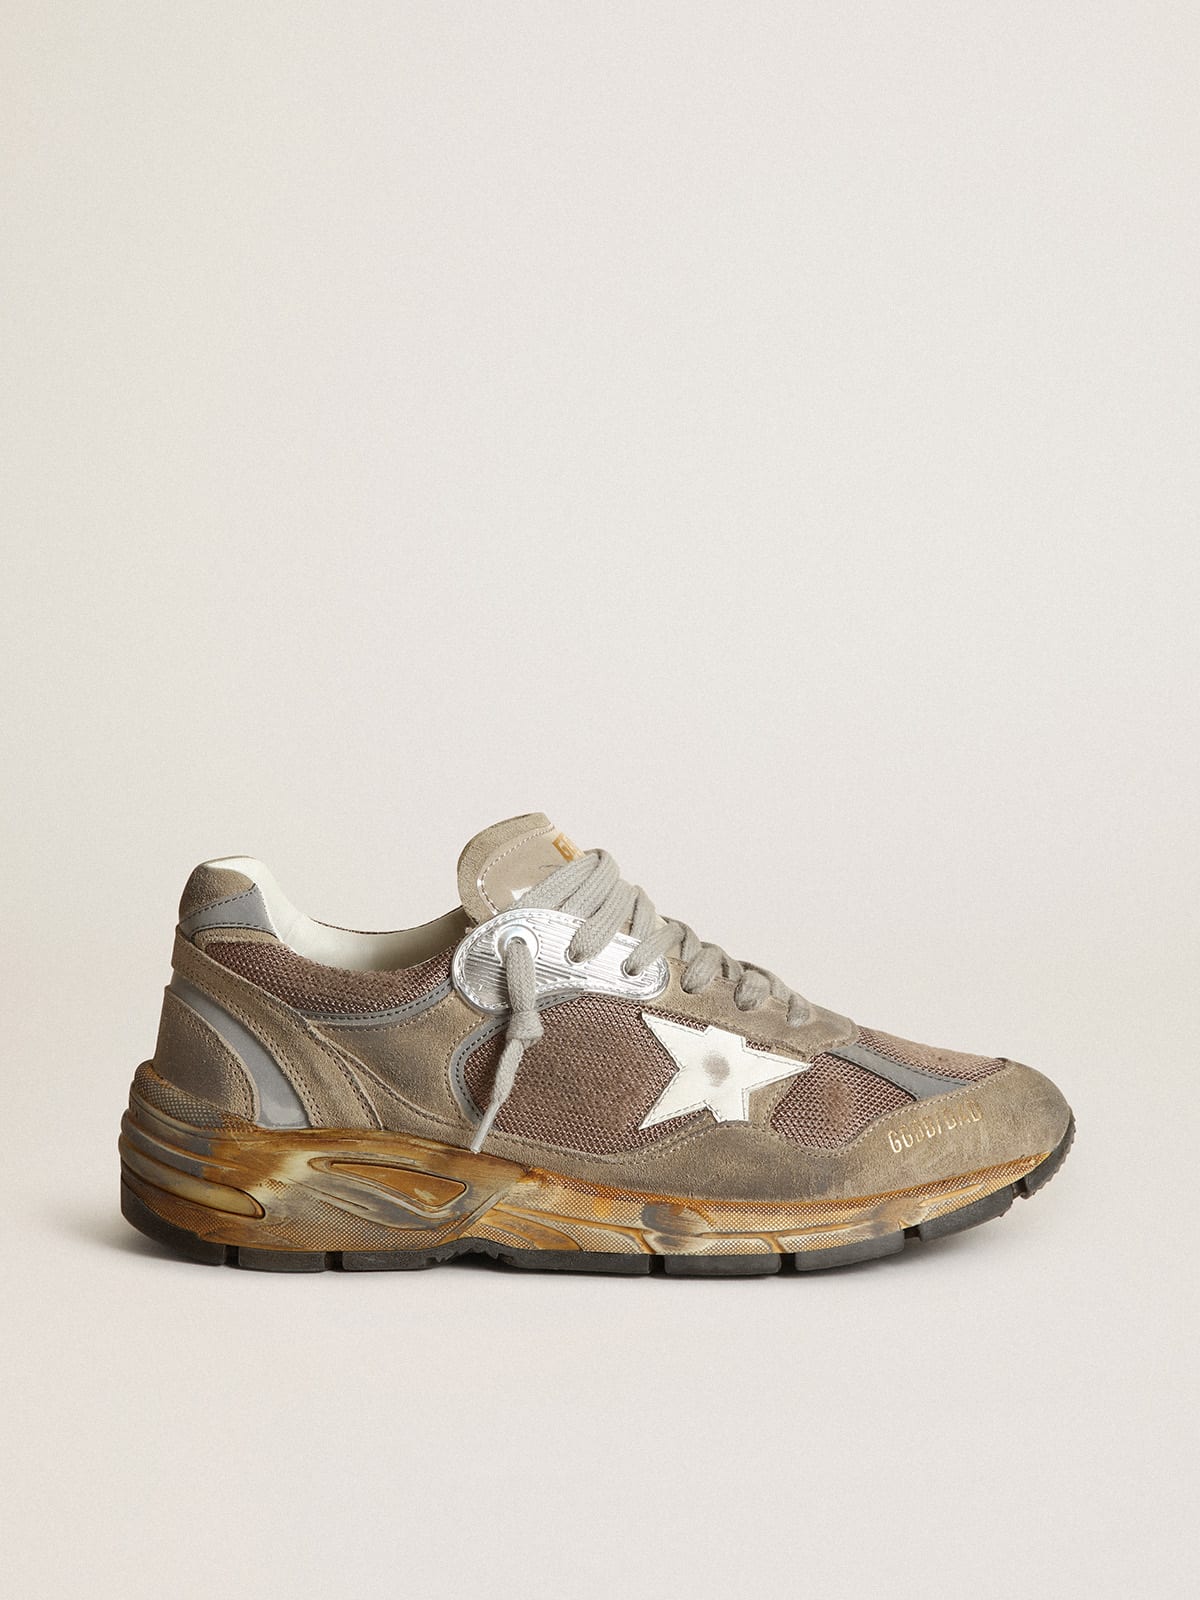 Men's Dad-Star sneakers in dove-gray mesh and suede with white leather star